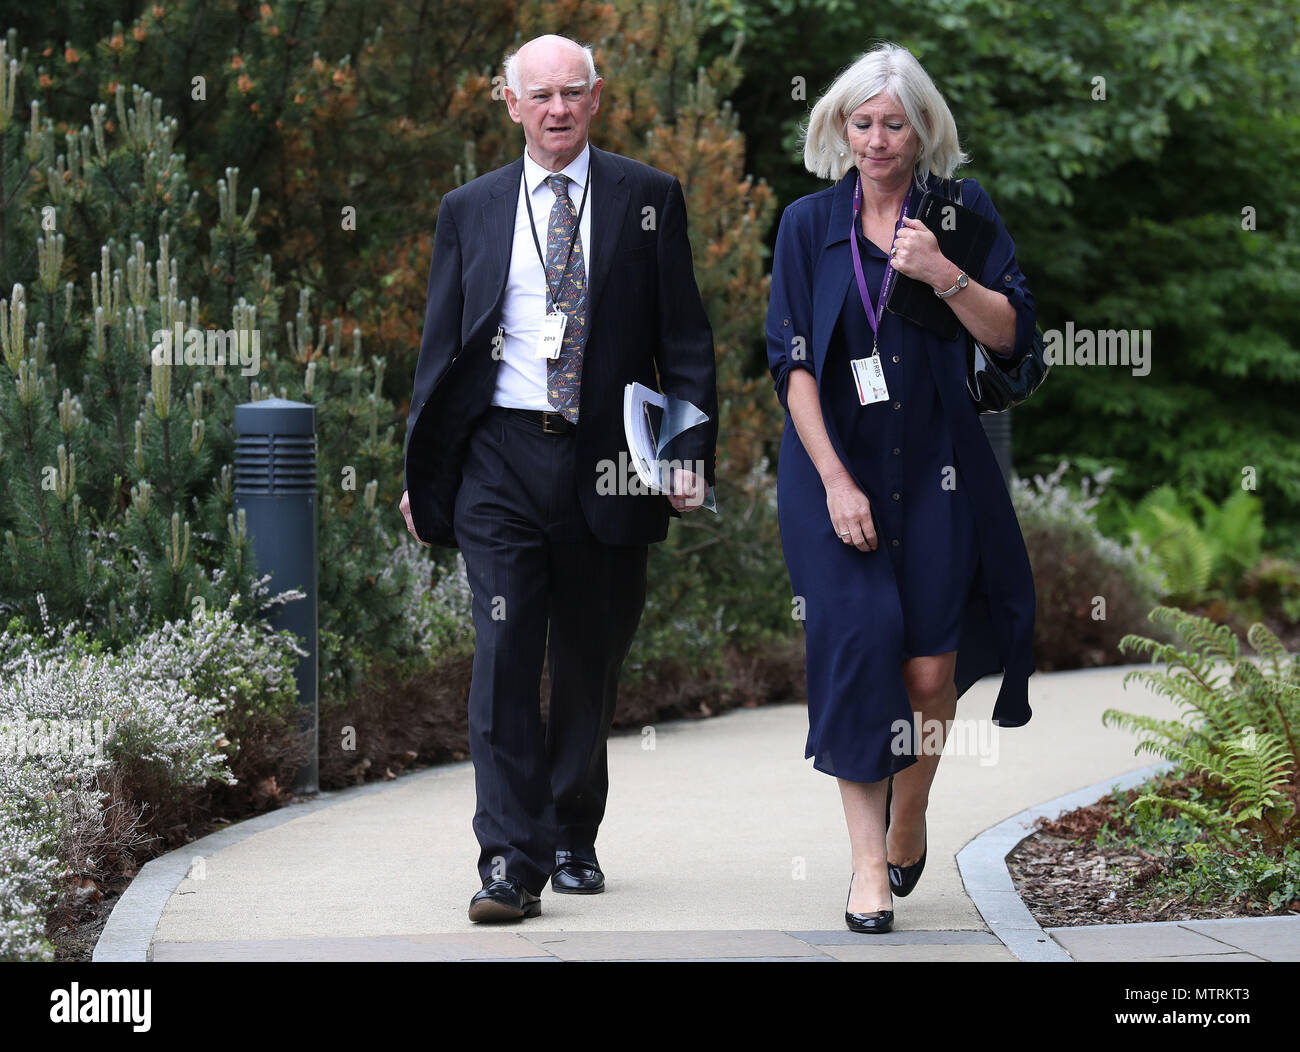 RBS Chairman Howard Davies and RBS Managing Director, Personal Banking Jane Howard, arrive for the Royal Bank of Scotland annual general meeting at RBS Headquarters in Gogarburn, Edinburgh. Stock Photo